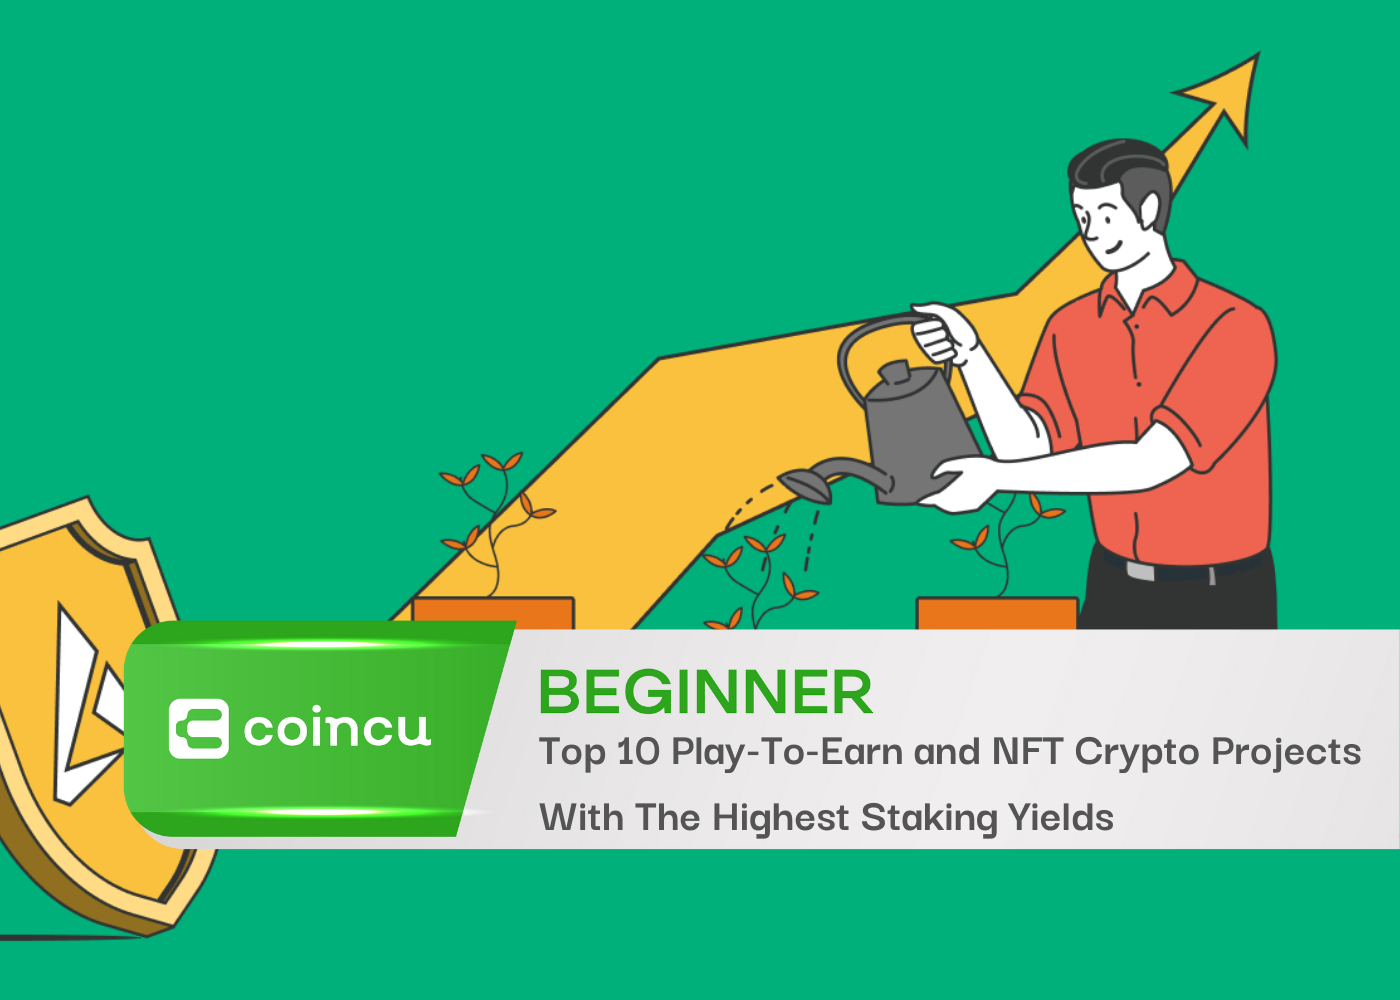 Top 10 Play-To-Earn and NFT Crypto Projects With The Highest Staking Yields